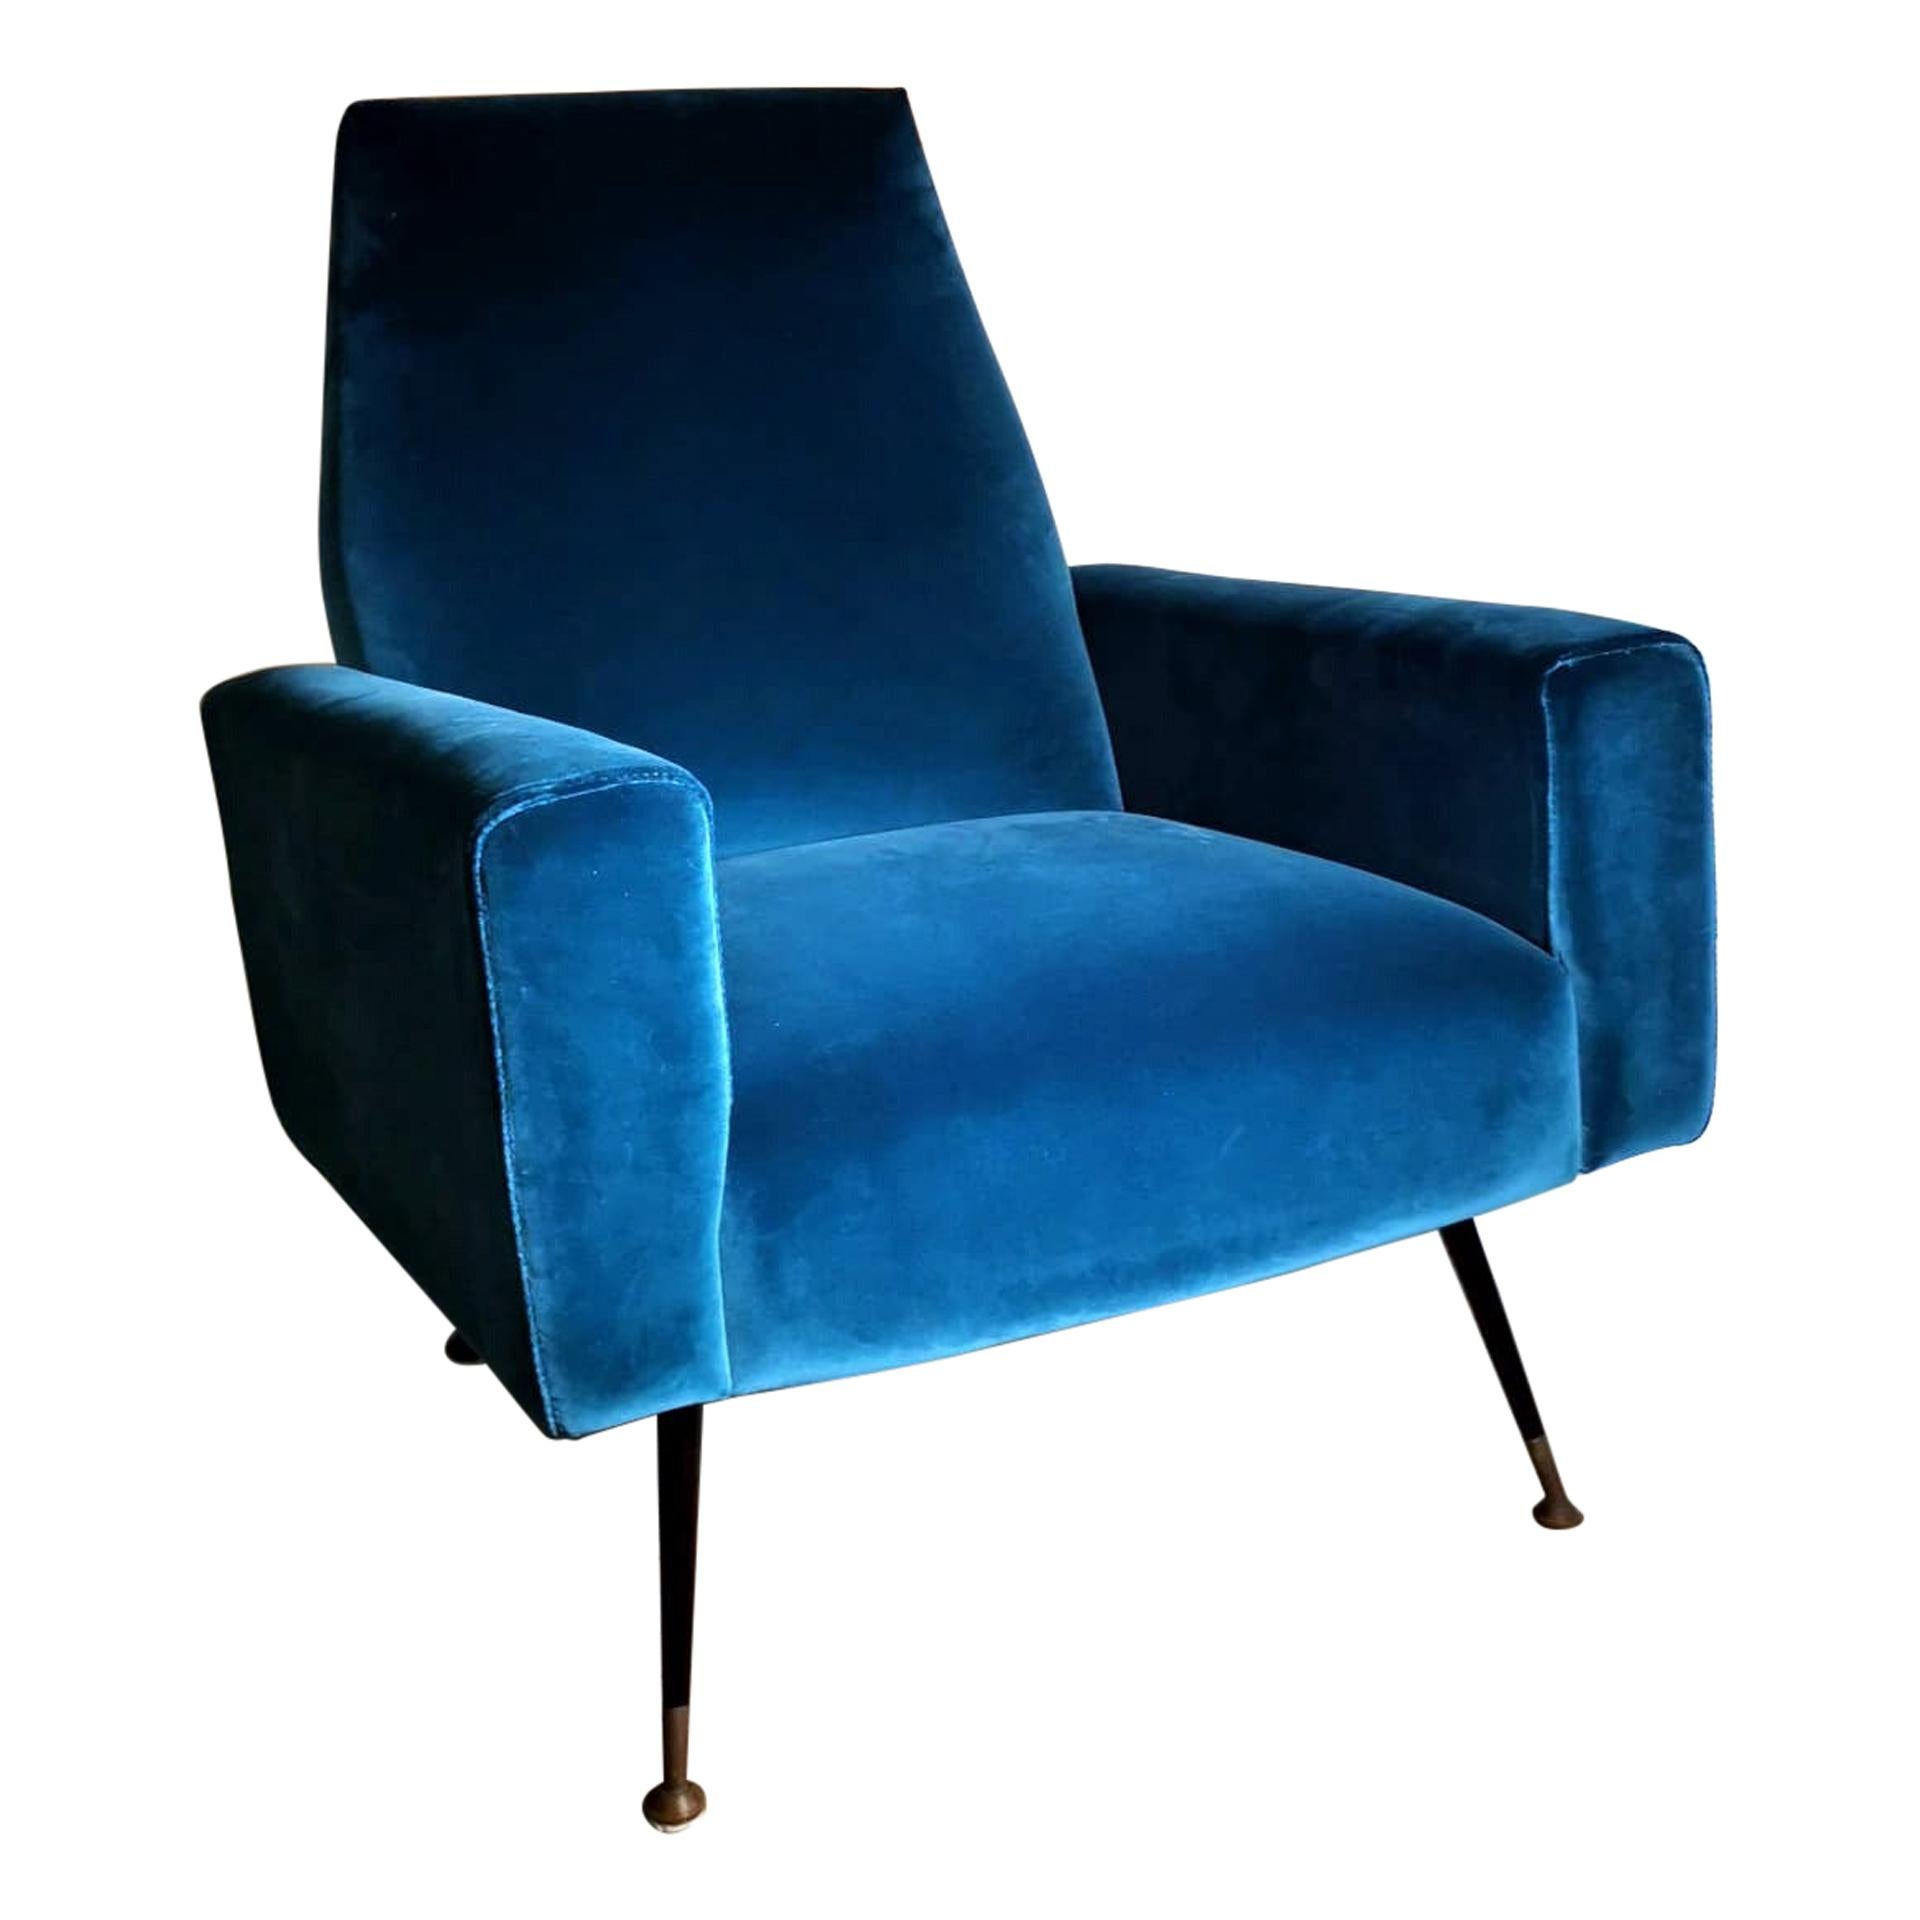 Vintage Italian Armchair Upholstered and Covered in Velvet Ottanio Color For Sale